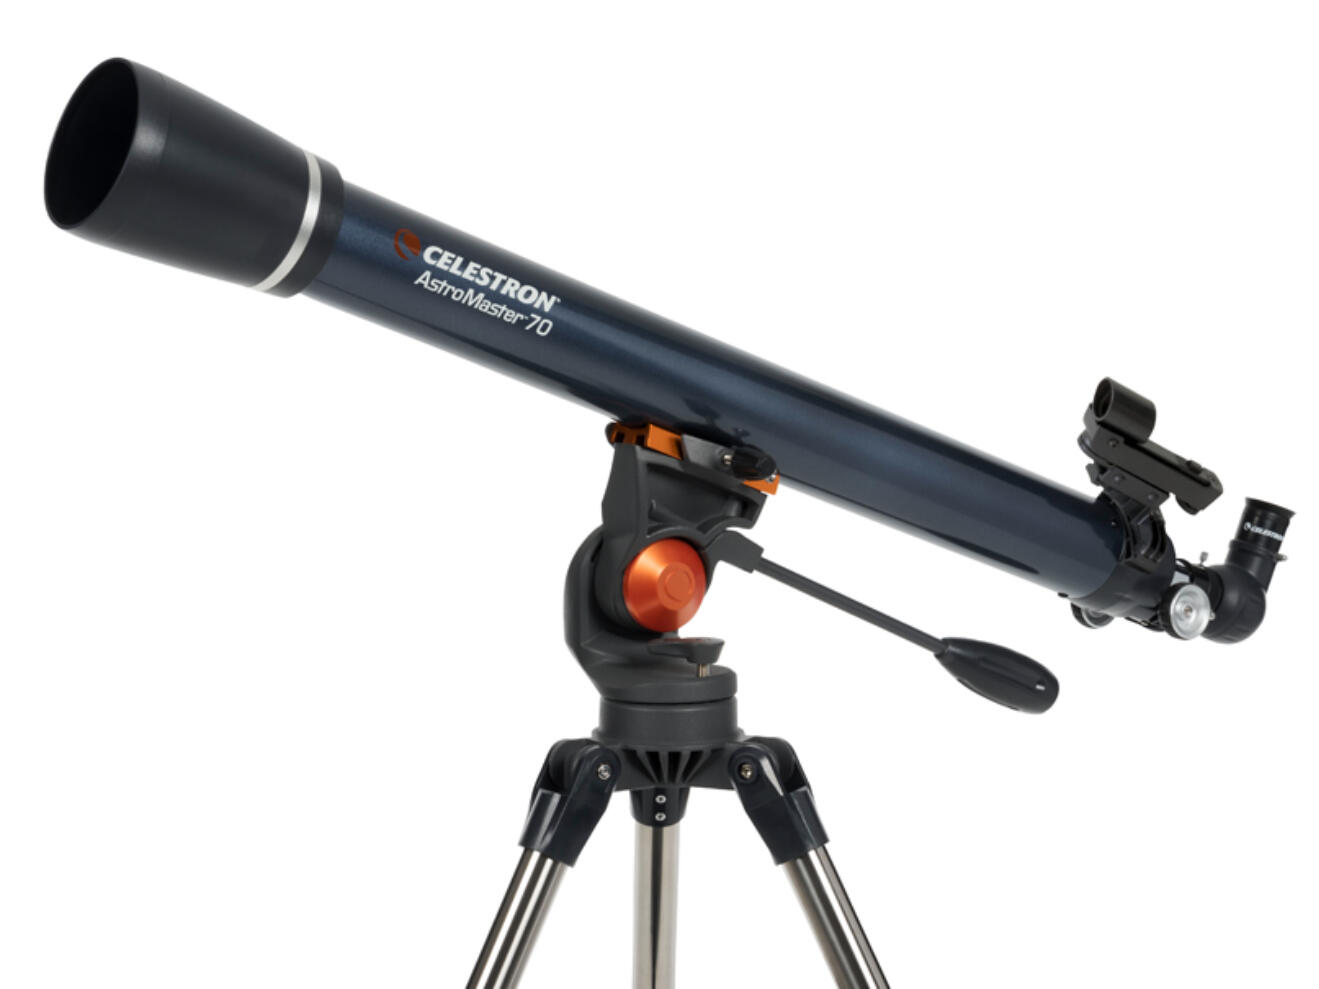 8 gifts for space lovers and amateur astronomers including telescopes, augmented reality lunar experiences, and more